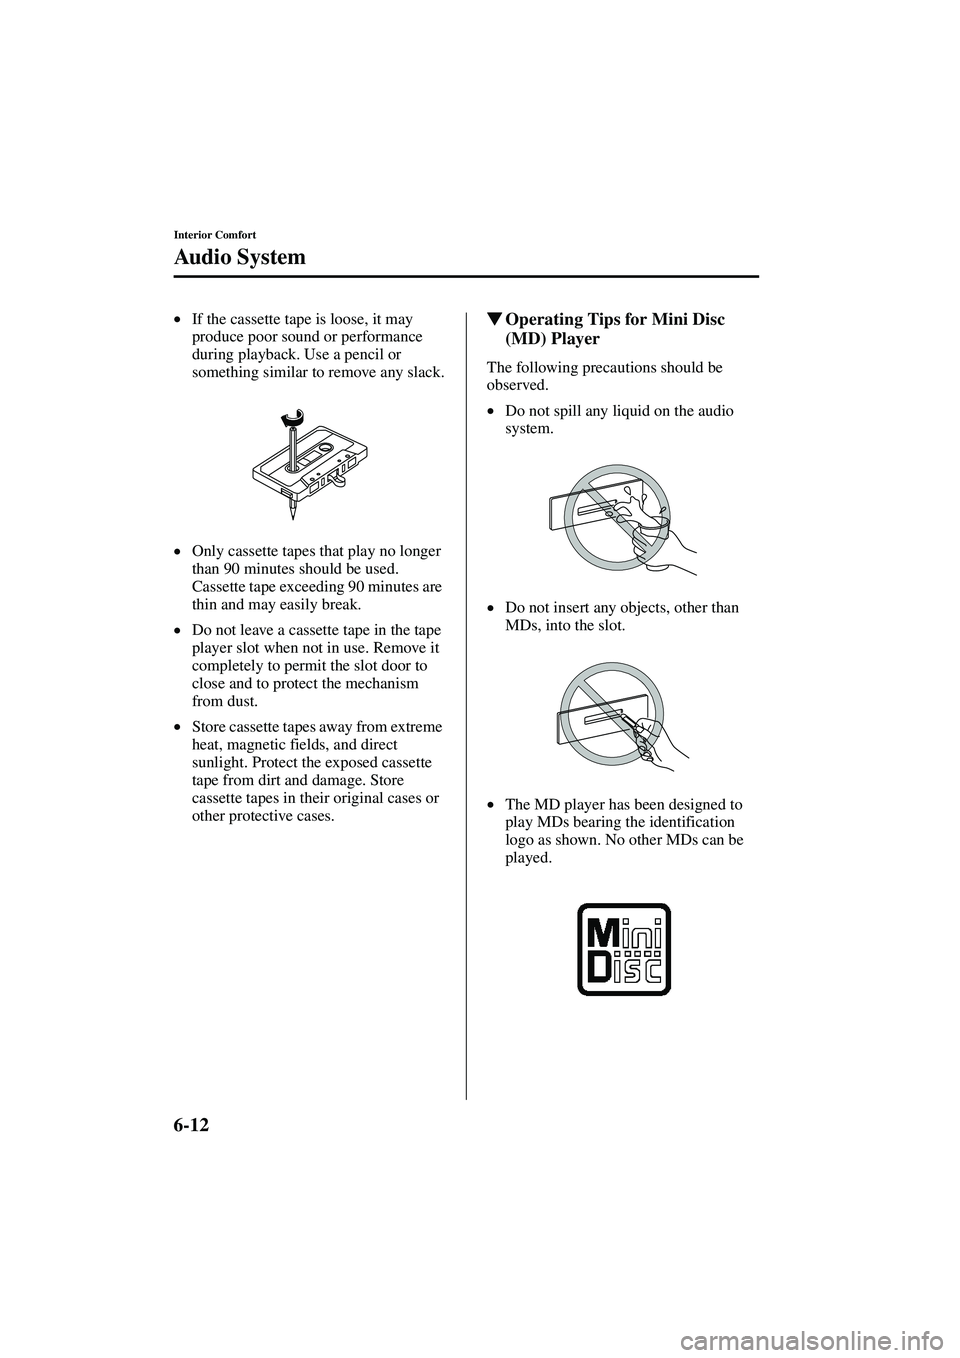 MAZDA MODEL MX-5 MIATA 2004  Owners Manual 6-12
Interior Comfort
Au di o S ys t em
Form No. 8S15-EA-03G
•If the cassette tape is loose, it may 
produce poor sound or performance 
during playback. Use a pencil or 
something similar to remove 